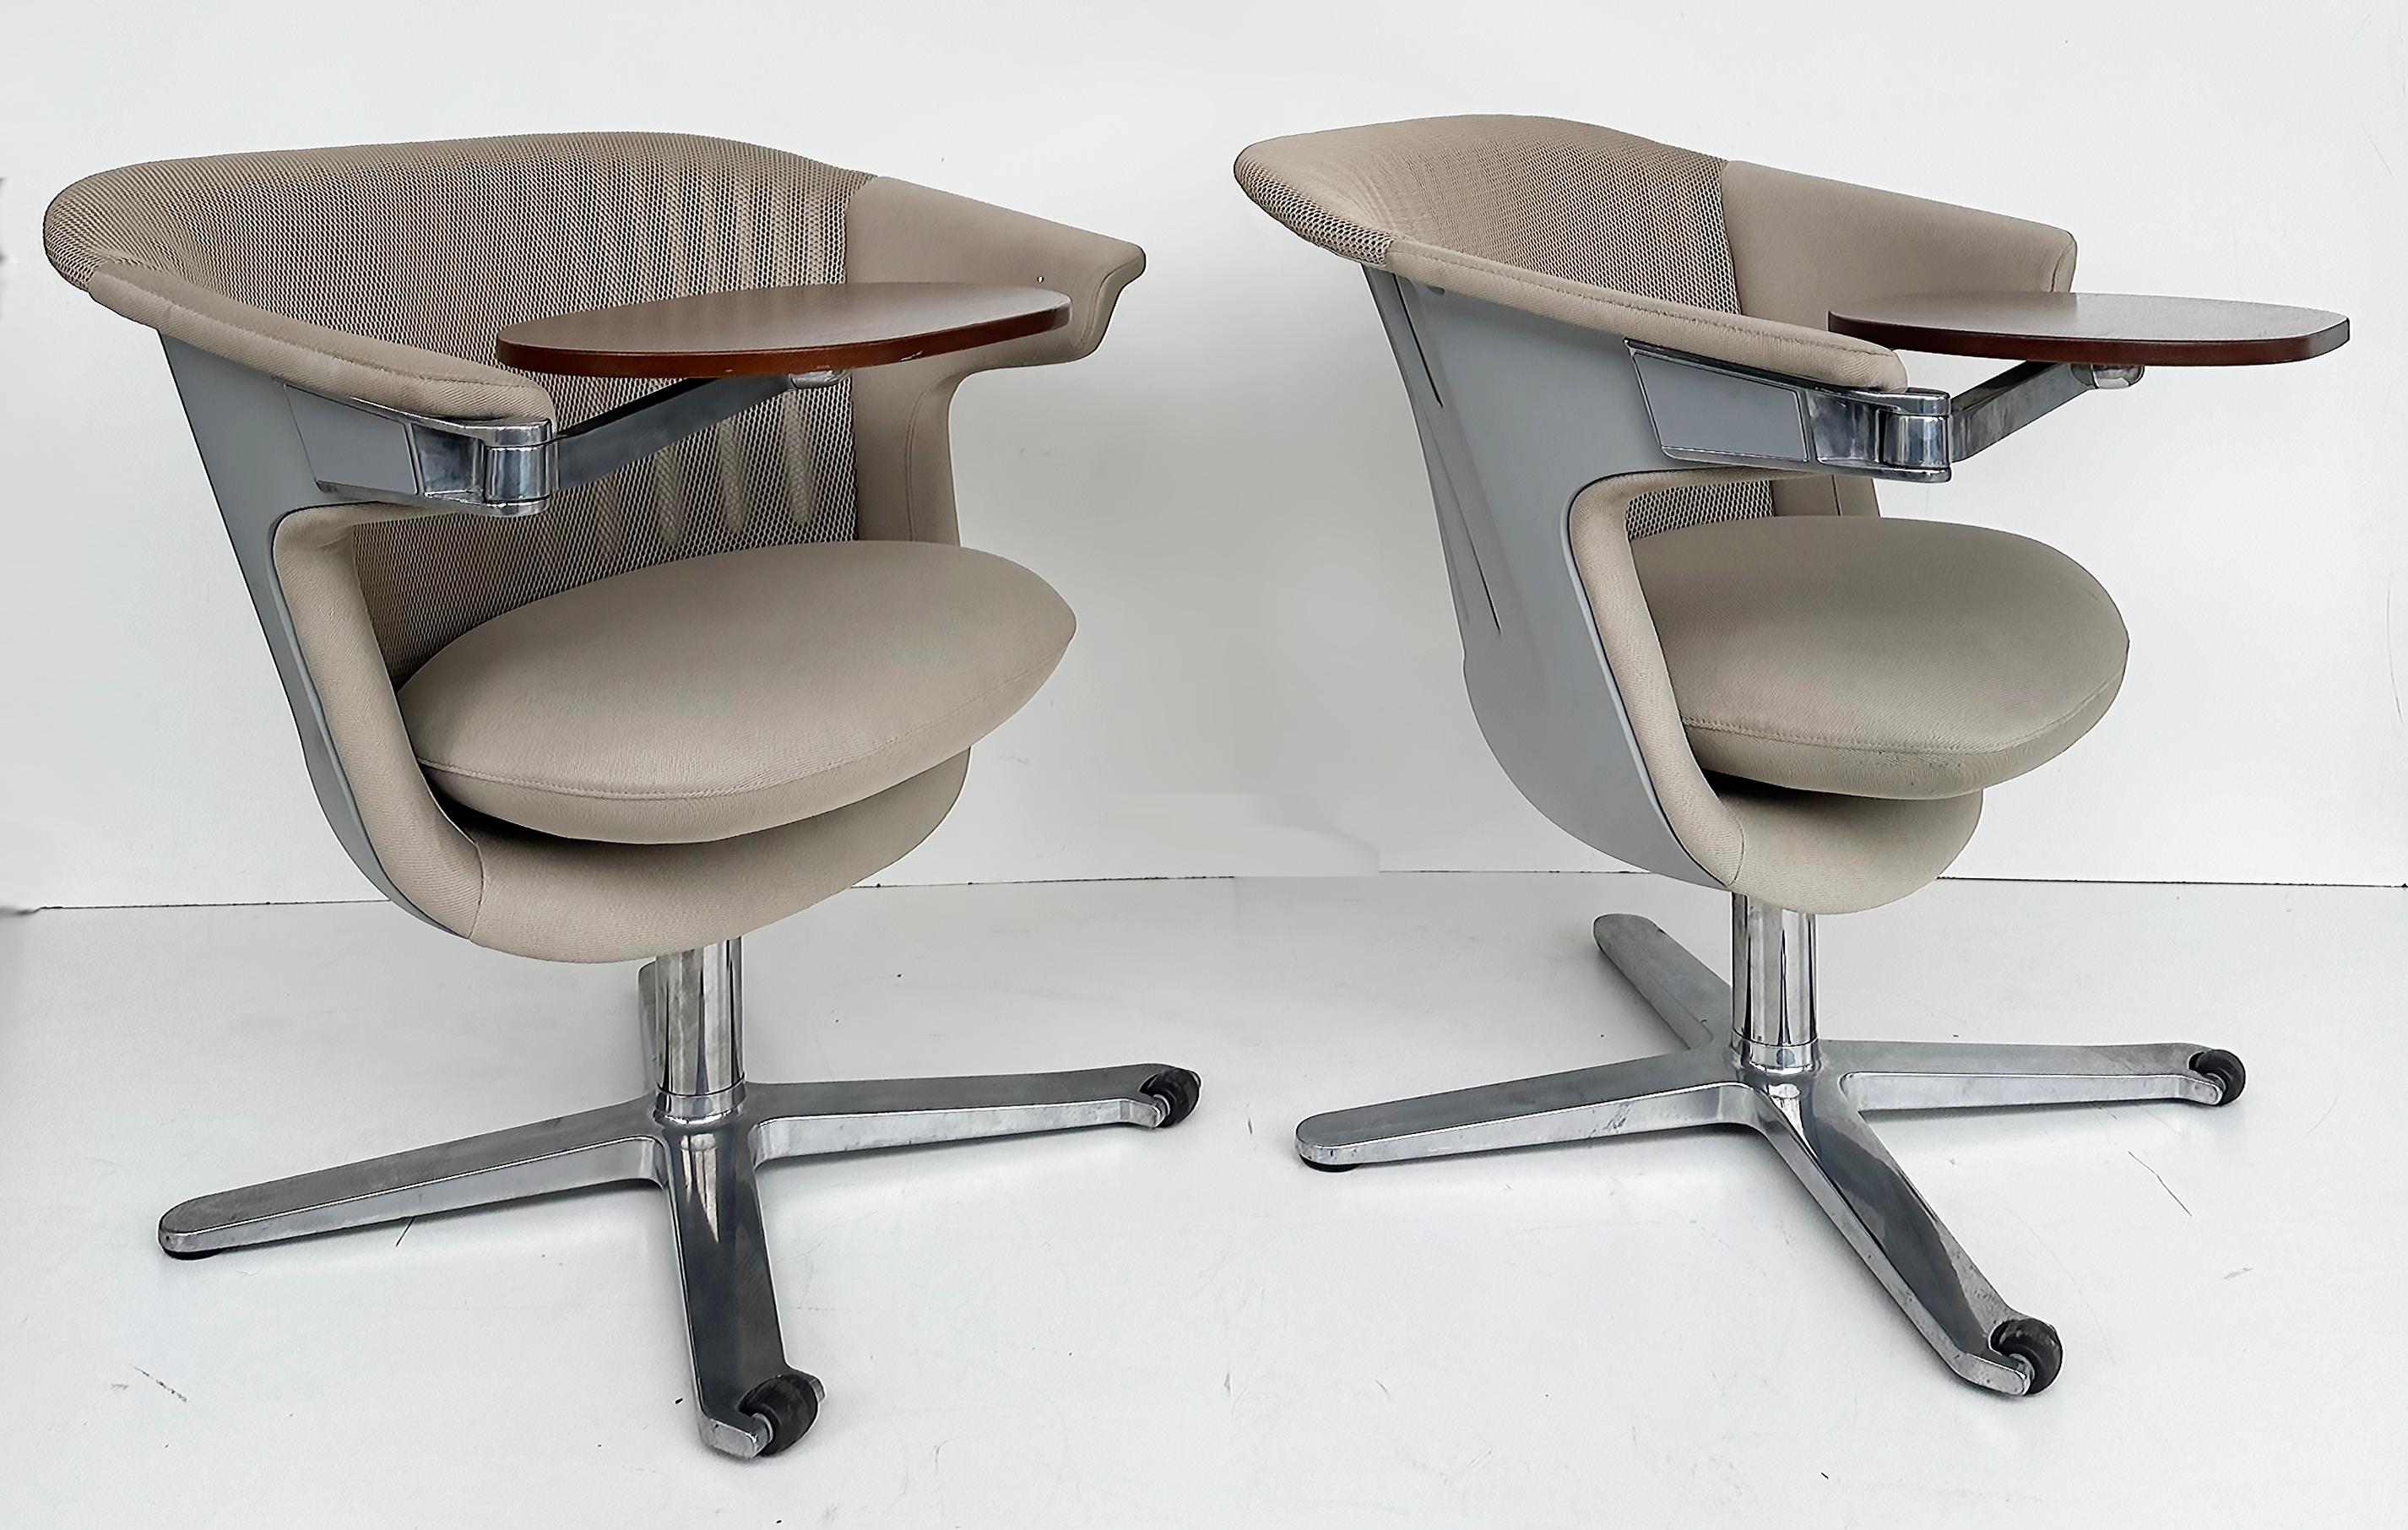 Steelcase i2i Ergonomic Dual Swivel Graphite Lounge Chair with Writing Tablet

The Modern i2i lounge chair is very comfortable and well designed, Feature independently dual swivel mechanism, Swivel the back or swivel the seat only to shift various